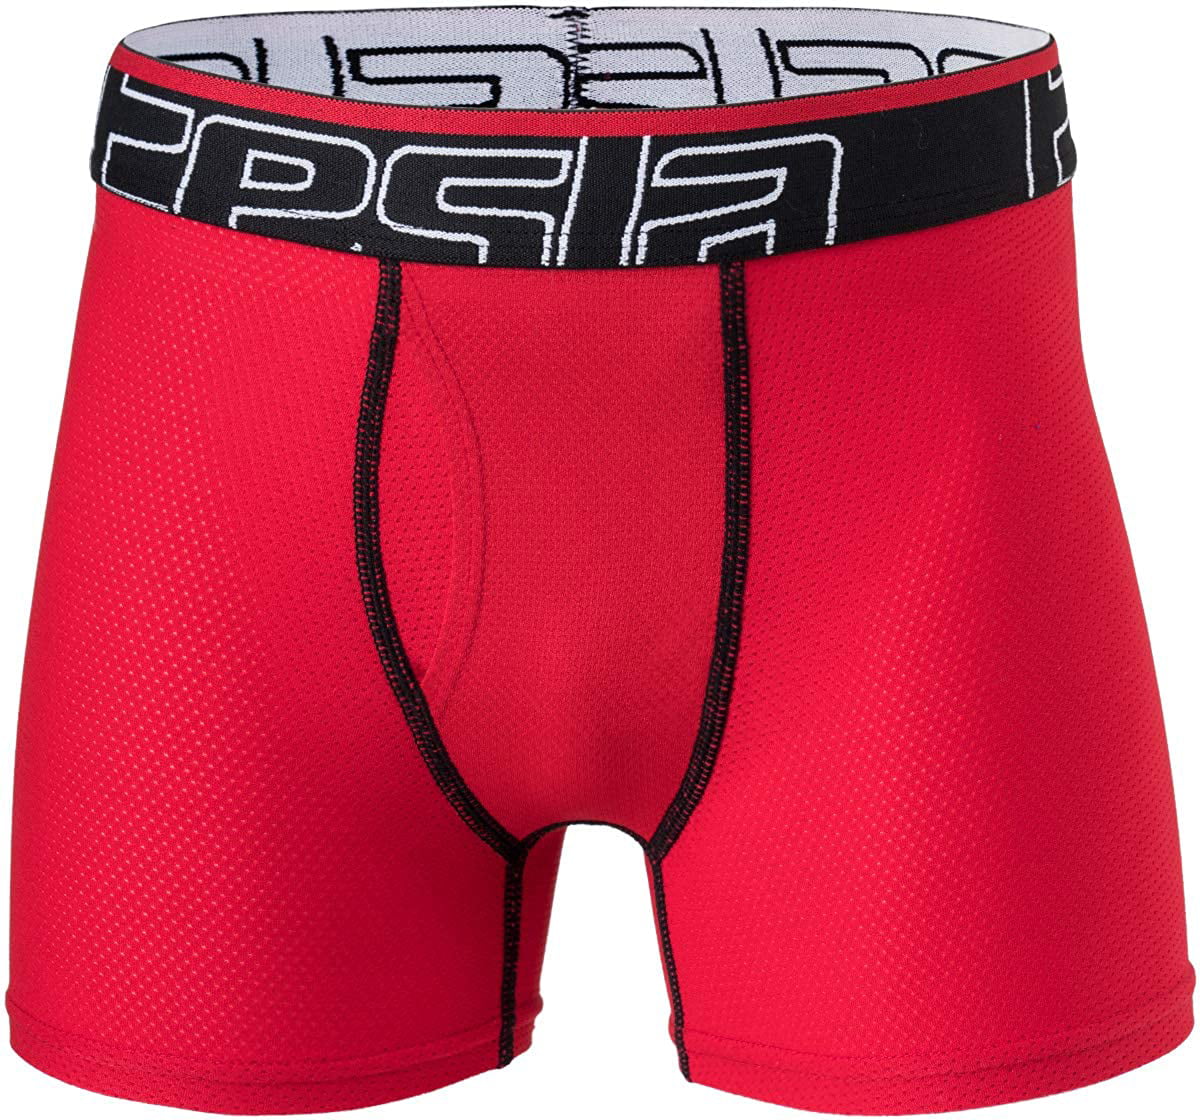 Open Fly Trunks with Pouch Performance Cooling Mesh Boxer Briefs TSLA 2 Pack Boy's 3 Inches Breathable Underwear 